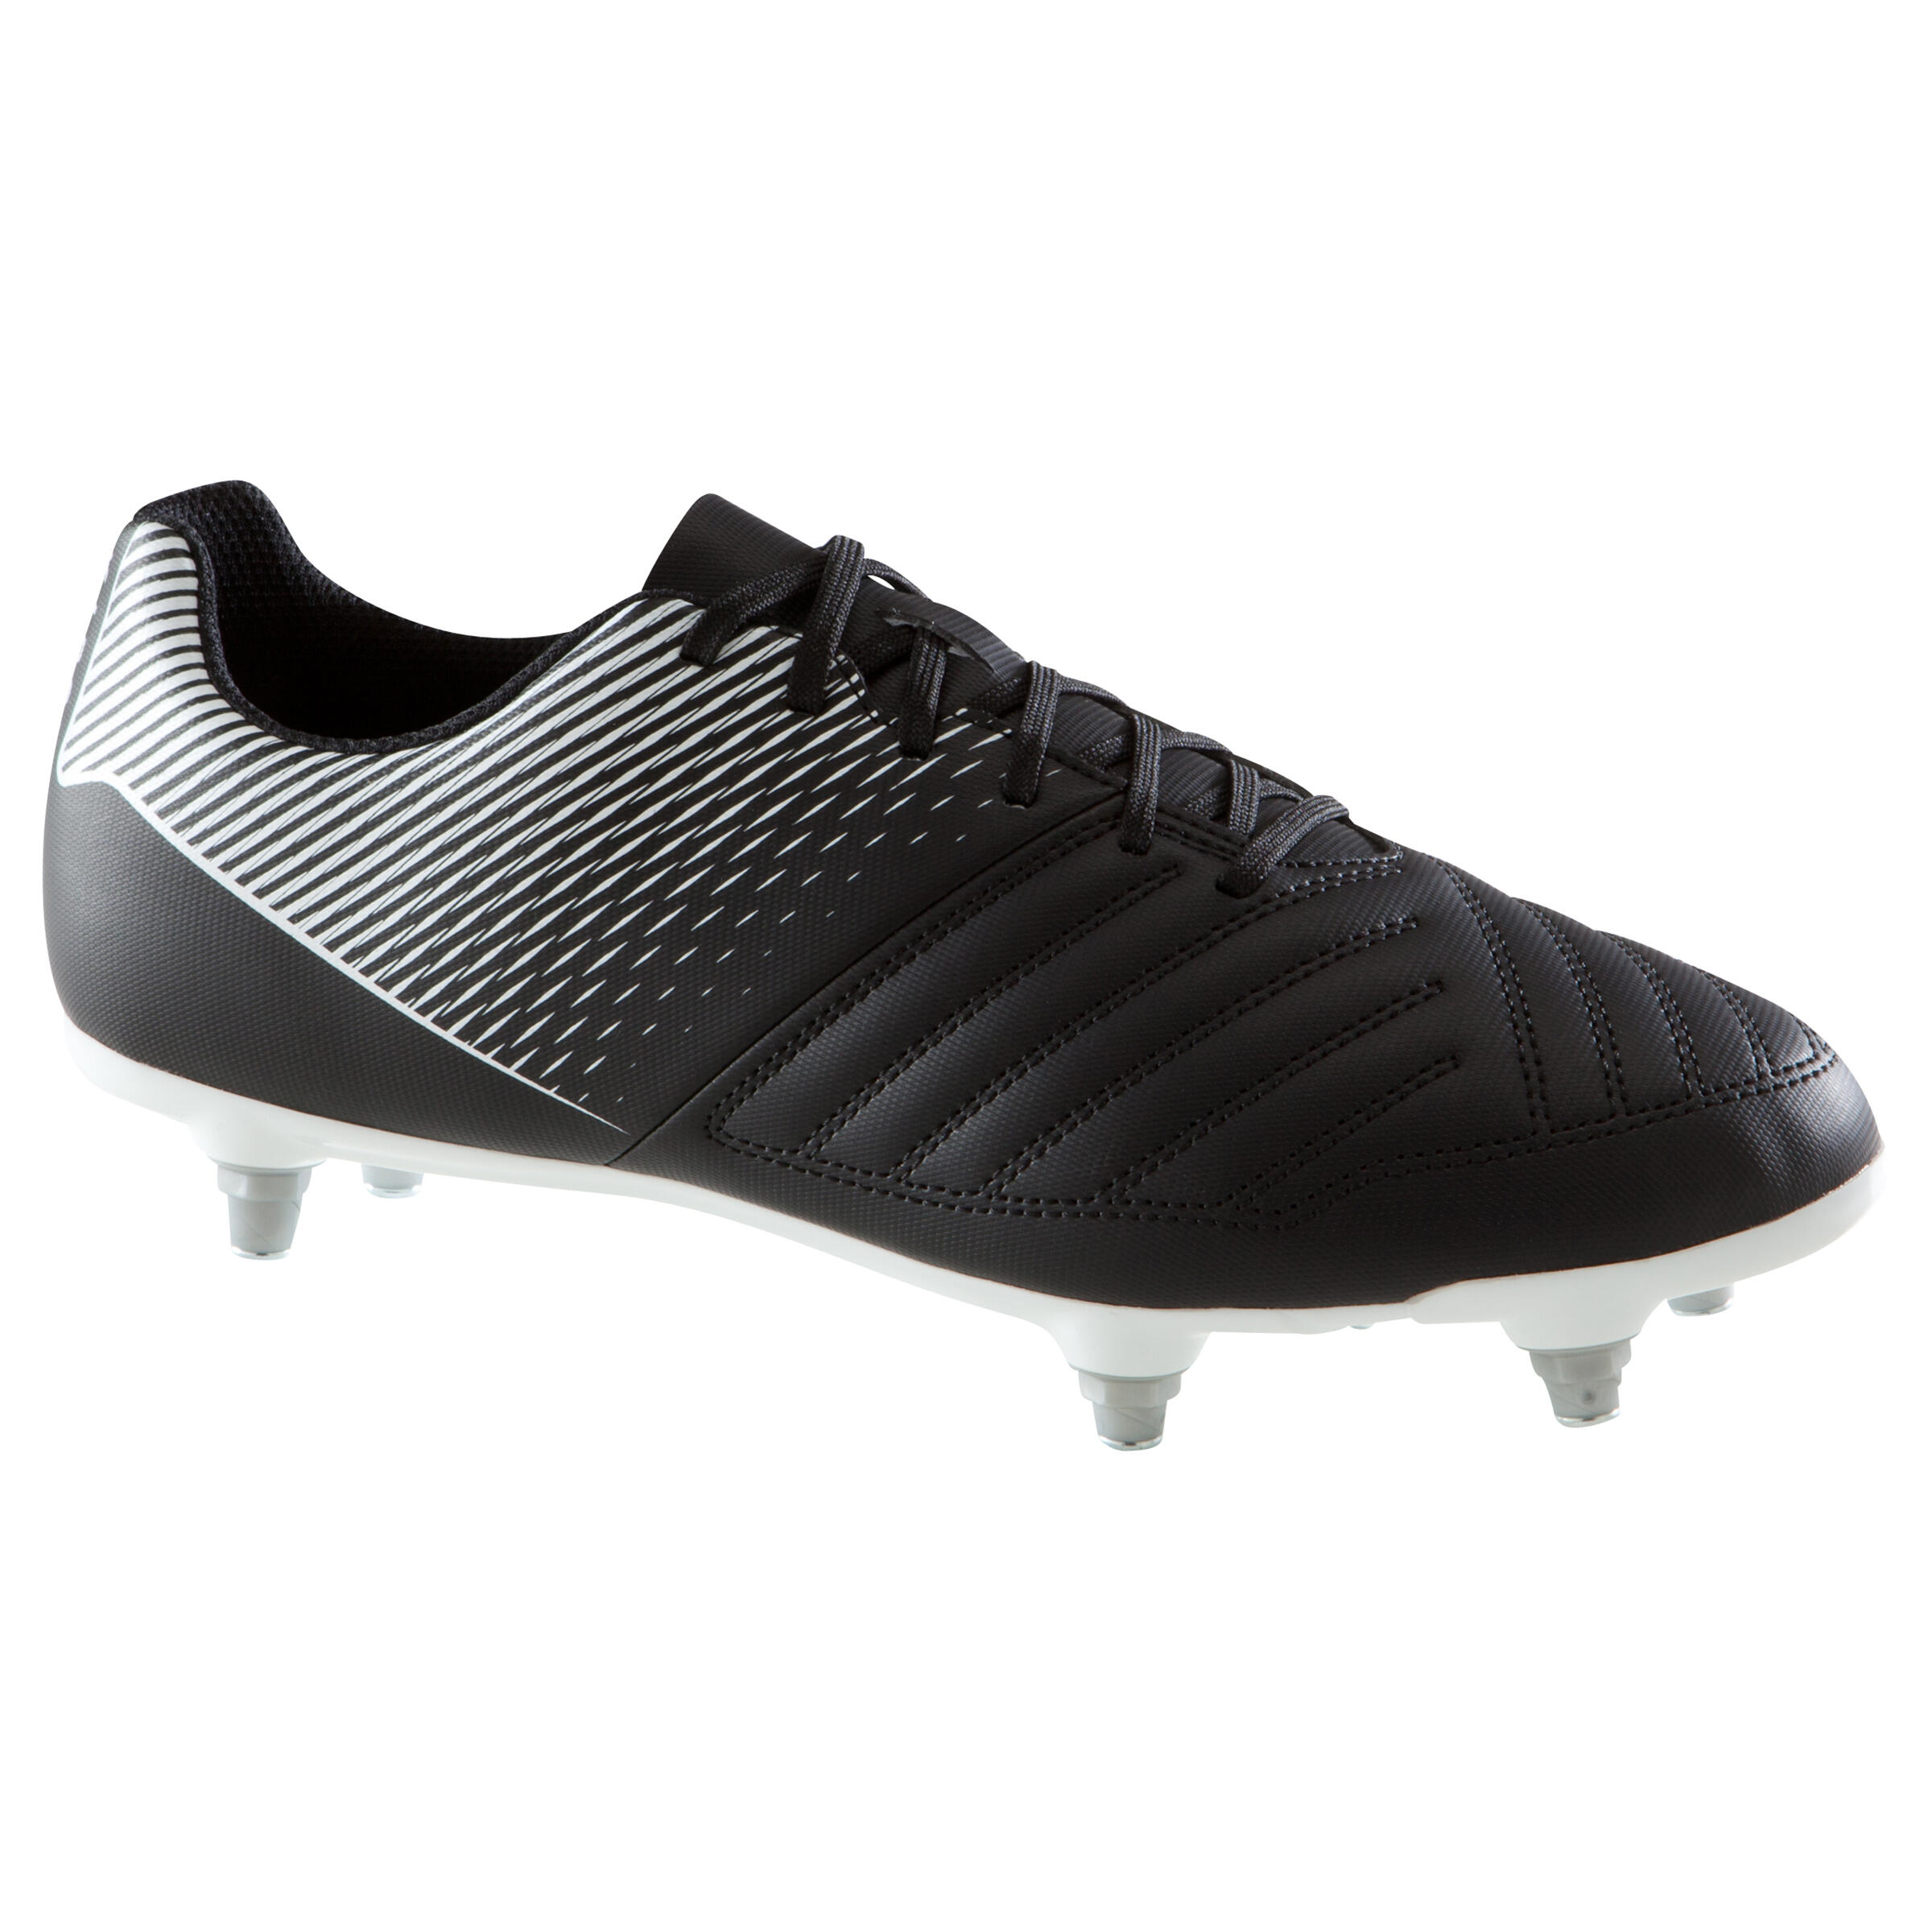 black and white football boots